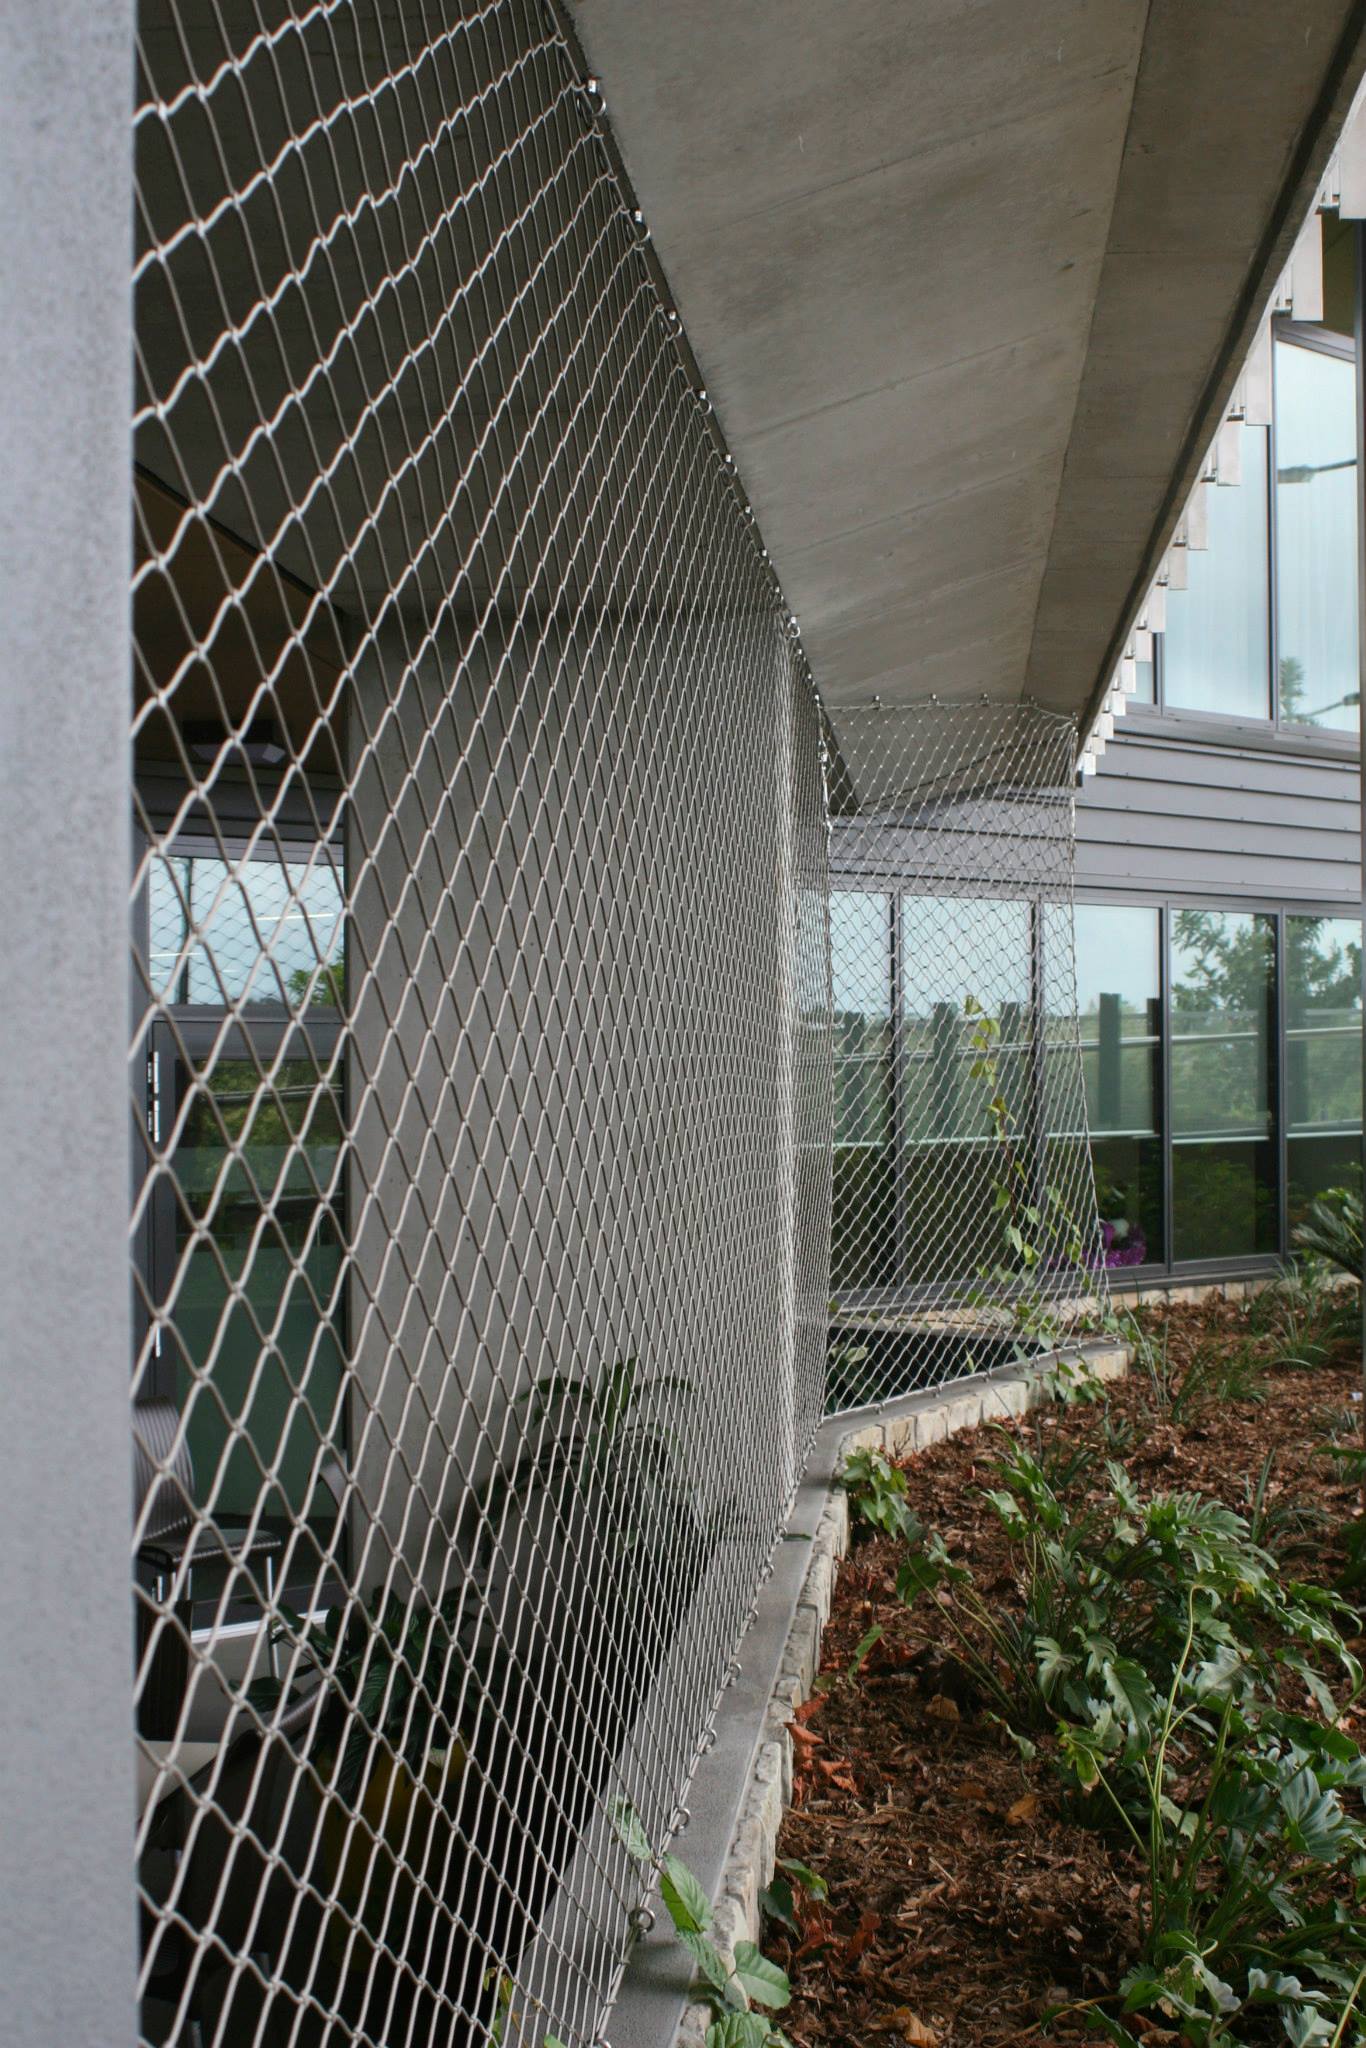 Flexi-Mesh used as fall protection for the car park in Australia